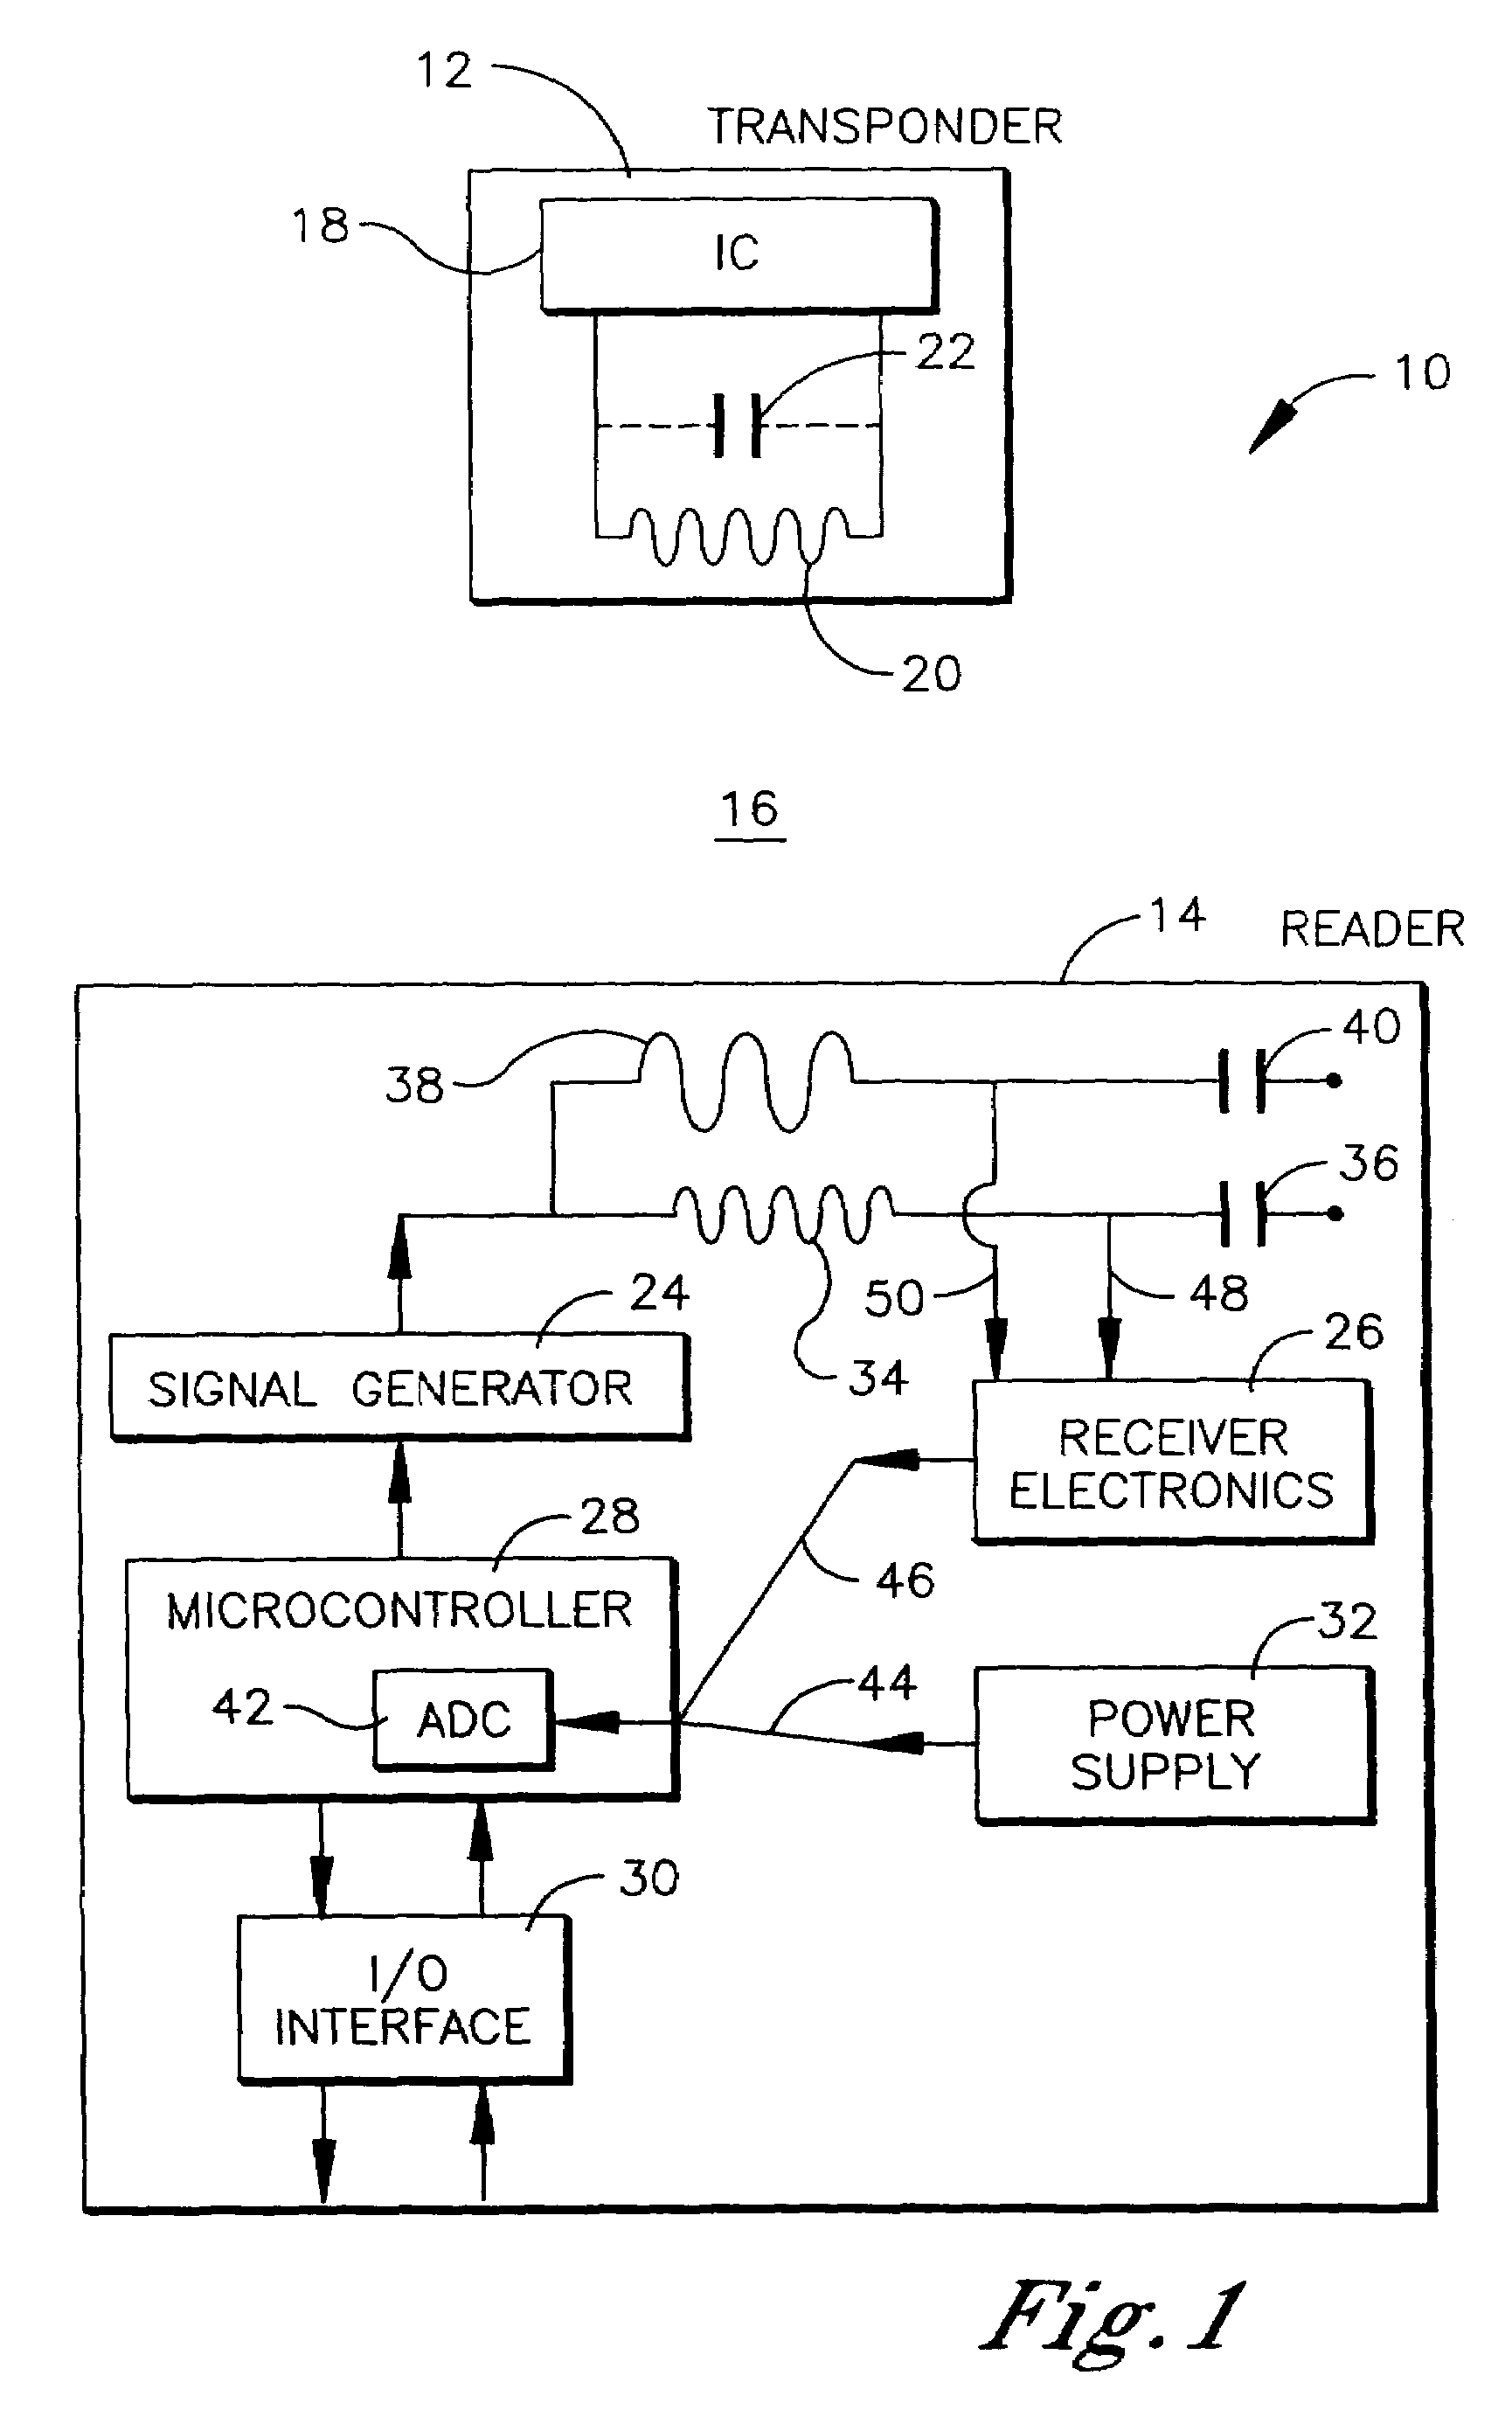 RFID reader utilizing an analog to digital converter for data acquisition and power monitoring functions